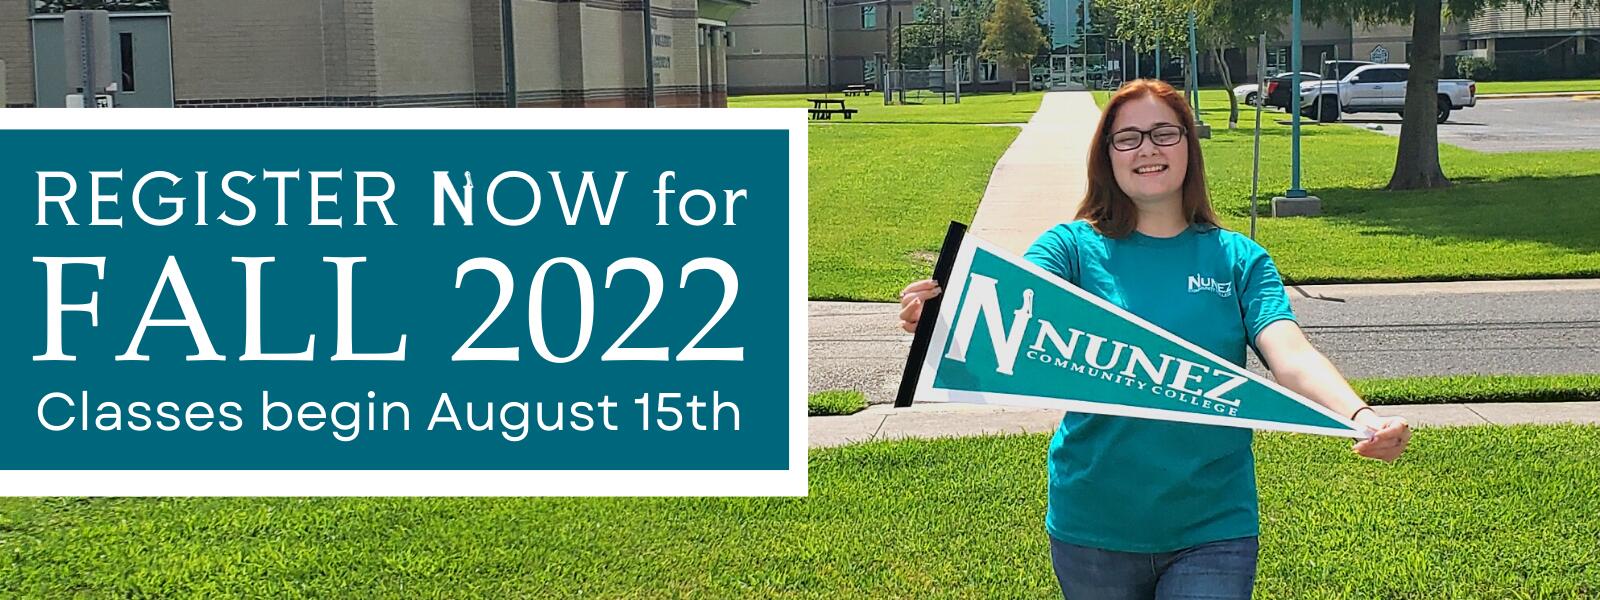 Register Now for Fall 2022 - Classes Begin August 15th